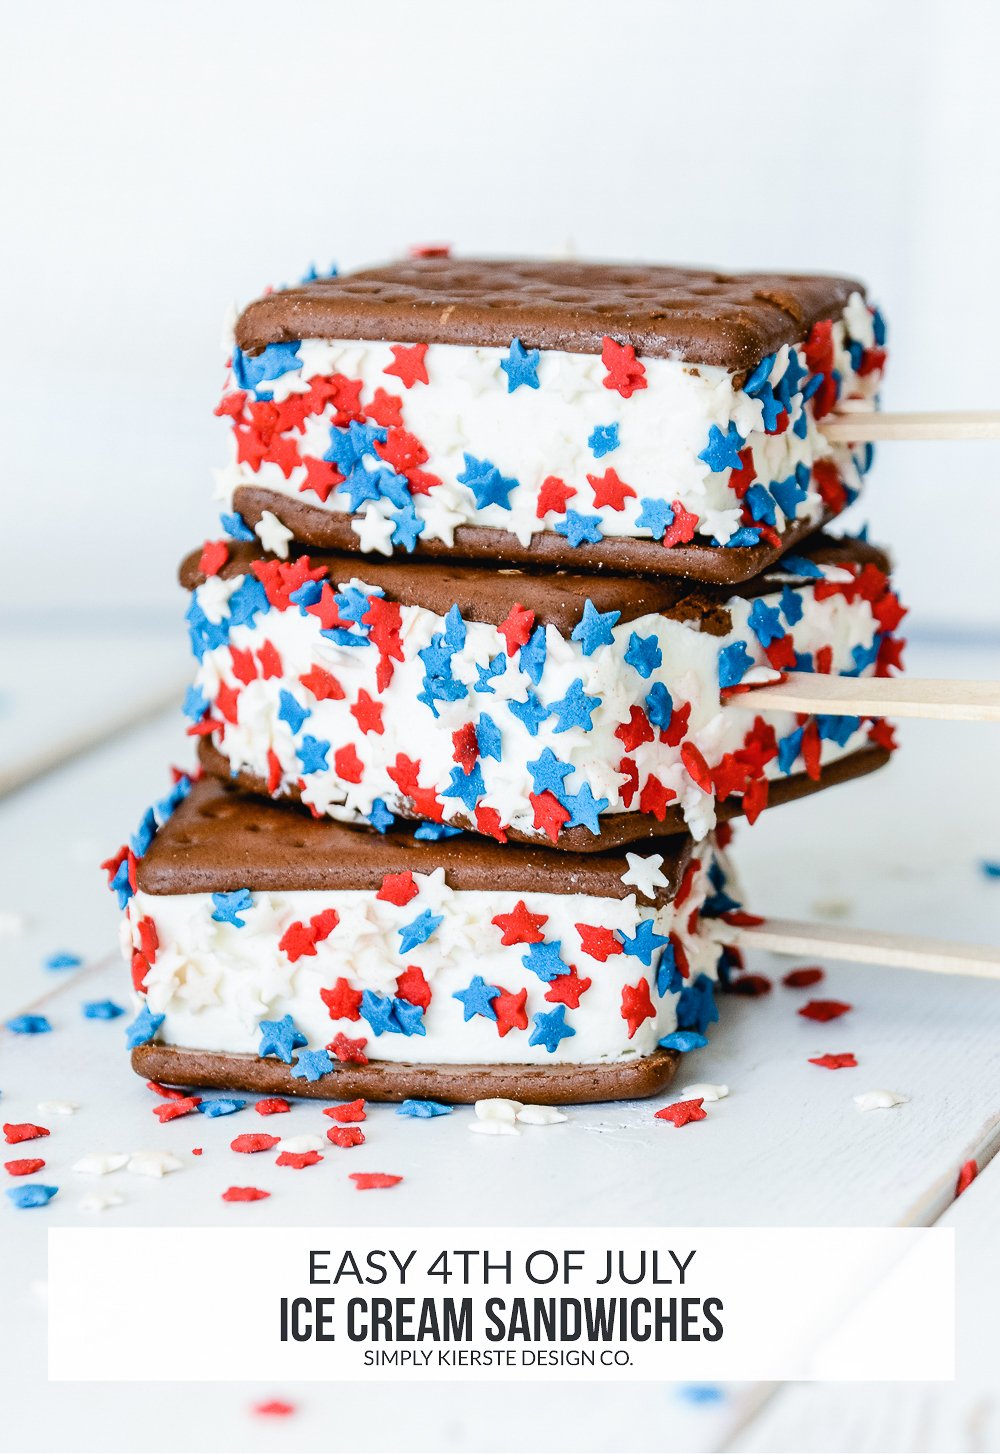 Easy 4th of July Treats: Sprinkle Ice Cream Sandwiches